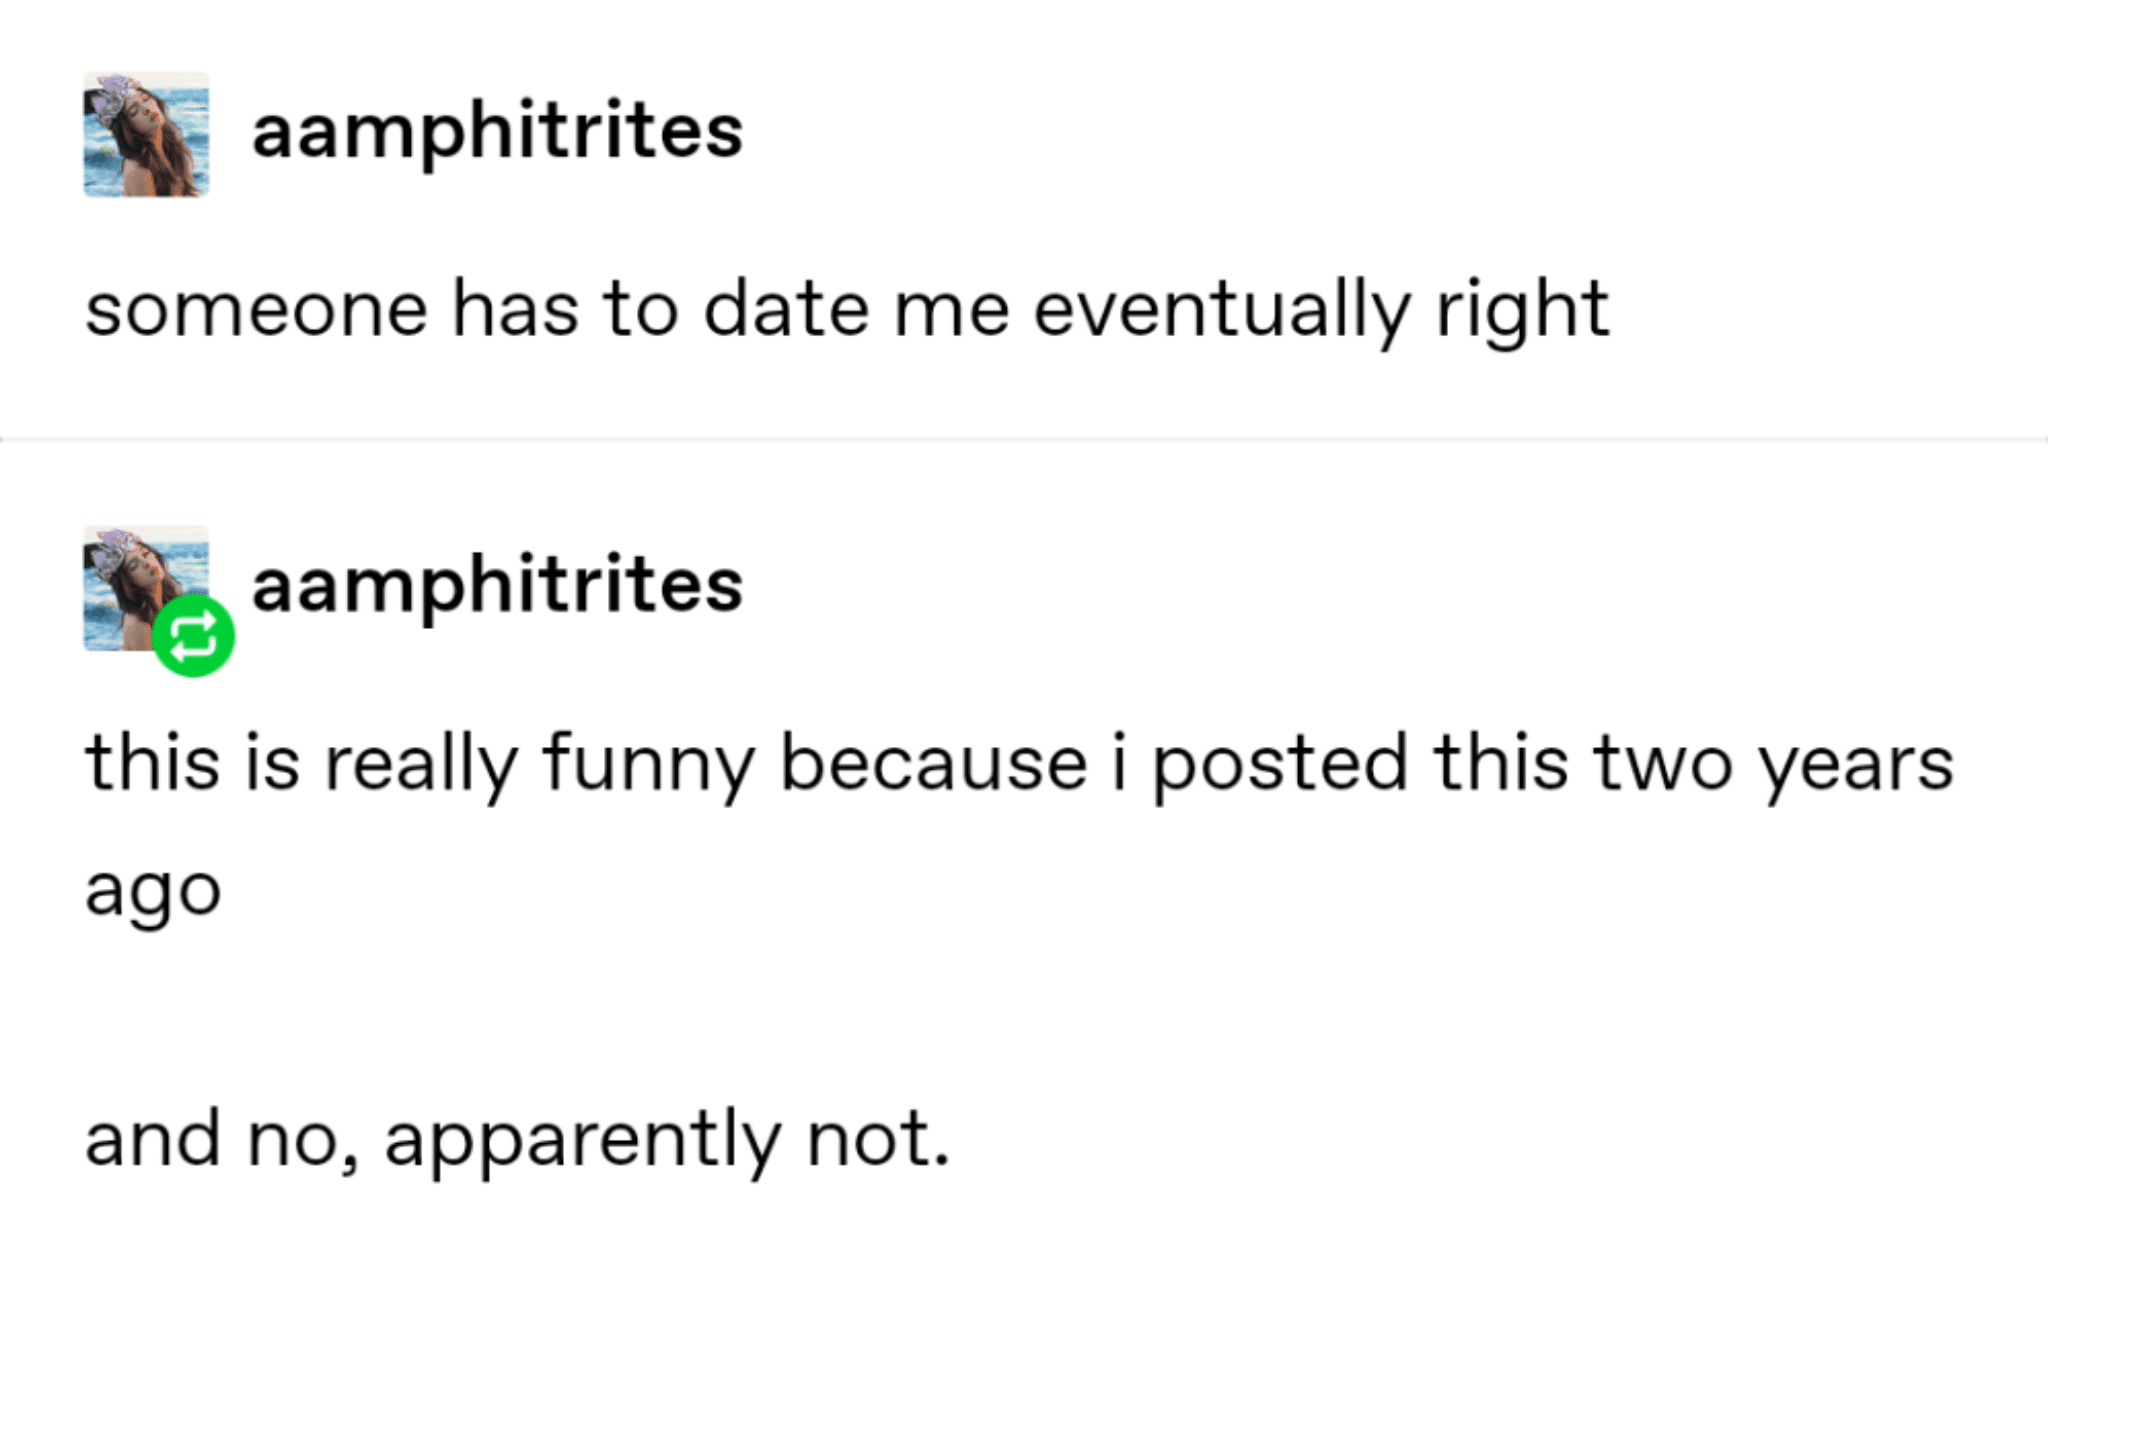 Depression,  depression memes Depression,  text: aamphitrites someone has to date me eventually right aamphitrites this is really funny because i posted this two years ago and no, apparently not. 